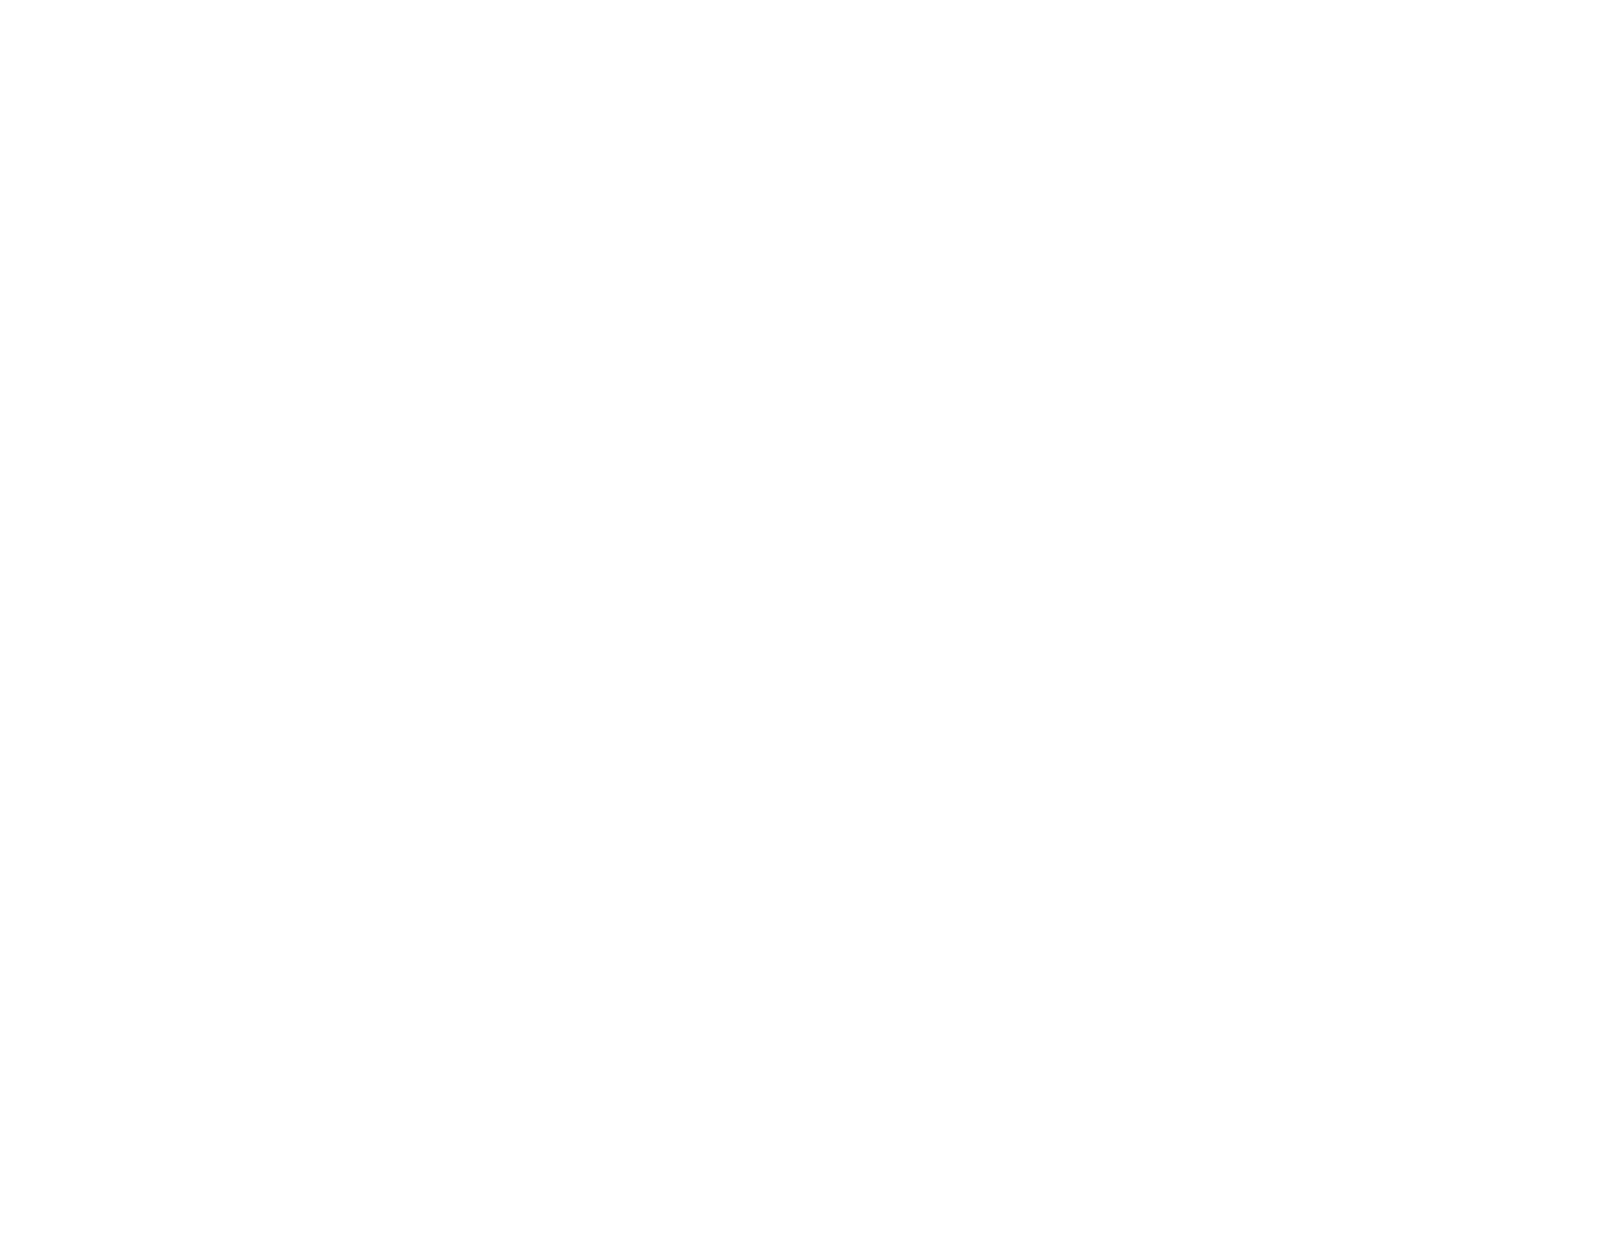 Software Advice badge for Most Recommended Software 2021